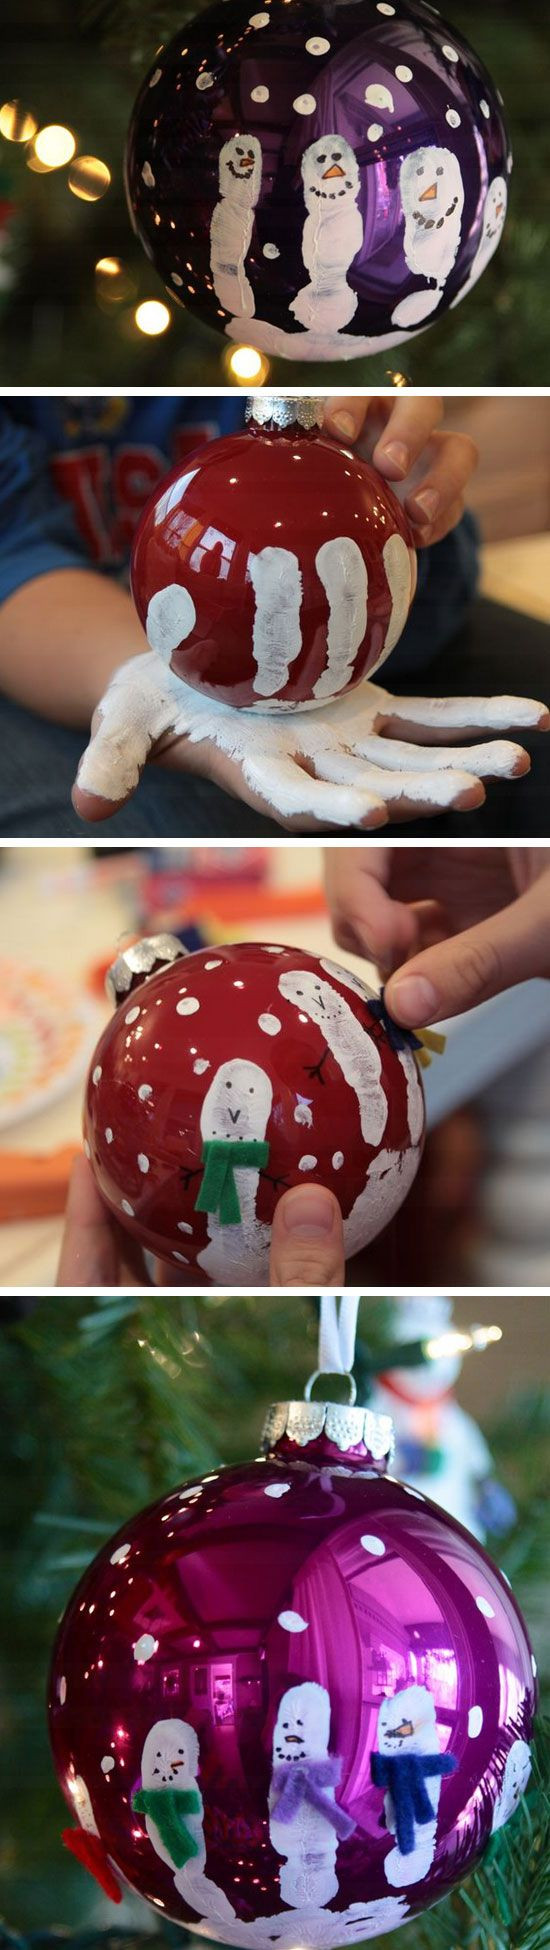 Christmas Ornaments DIY Kids
 Easy and Cute DIY Christmas Crafts for Kids to Make Hative